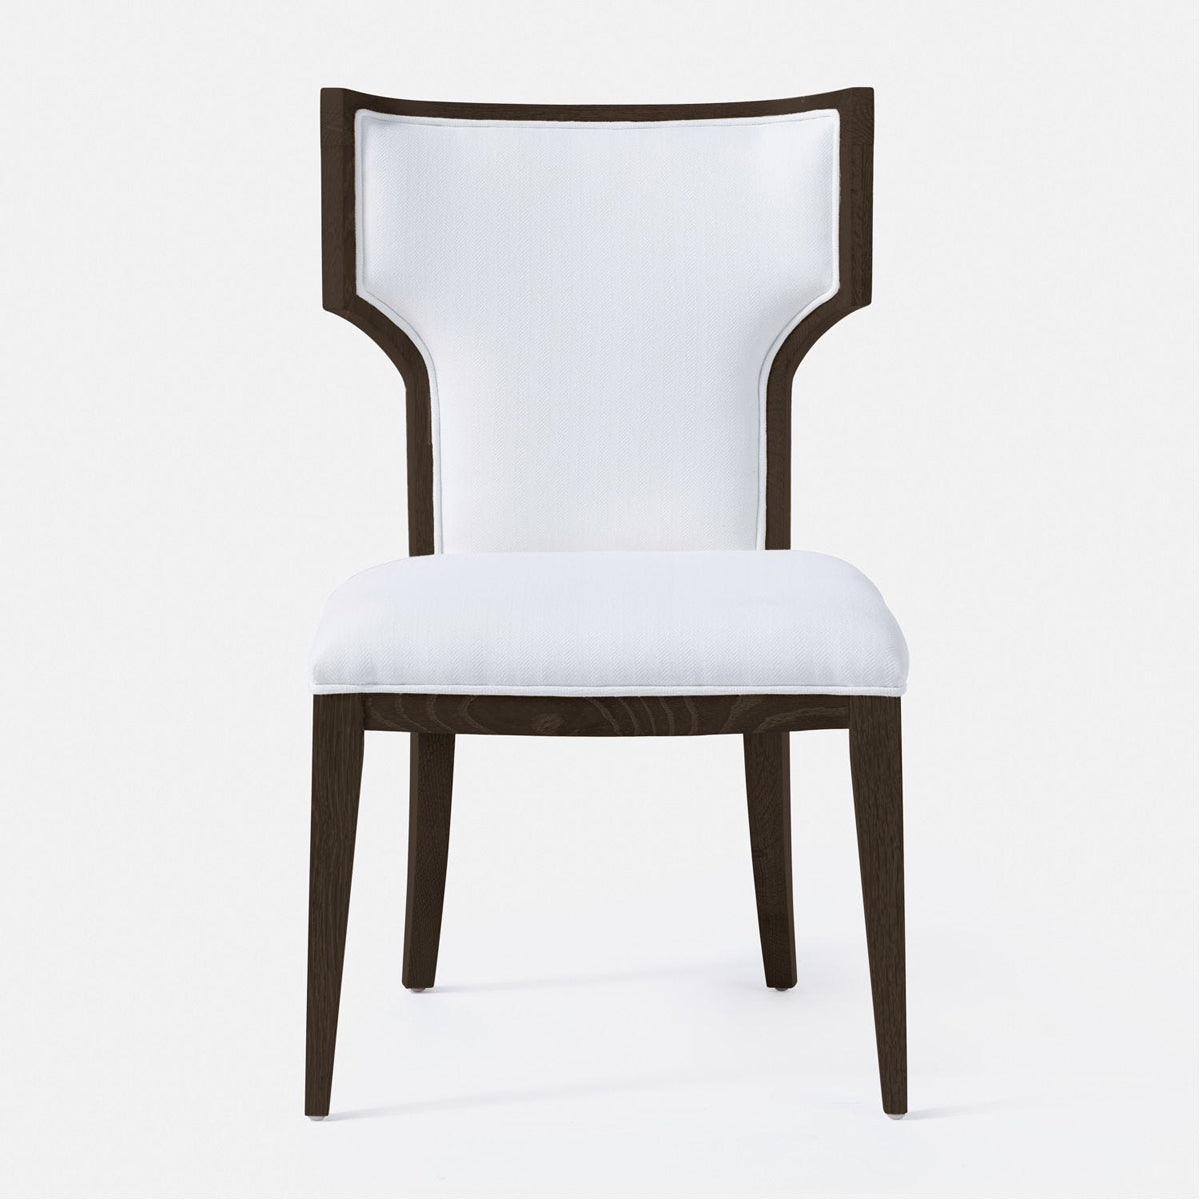 Made Goods Carleen Wingback Dining Chair in Weser Fabric